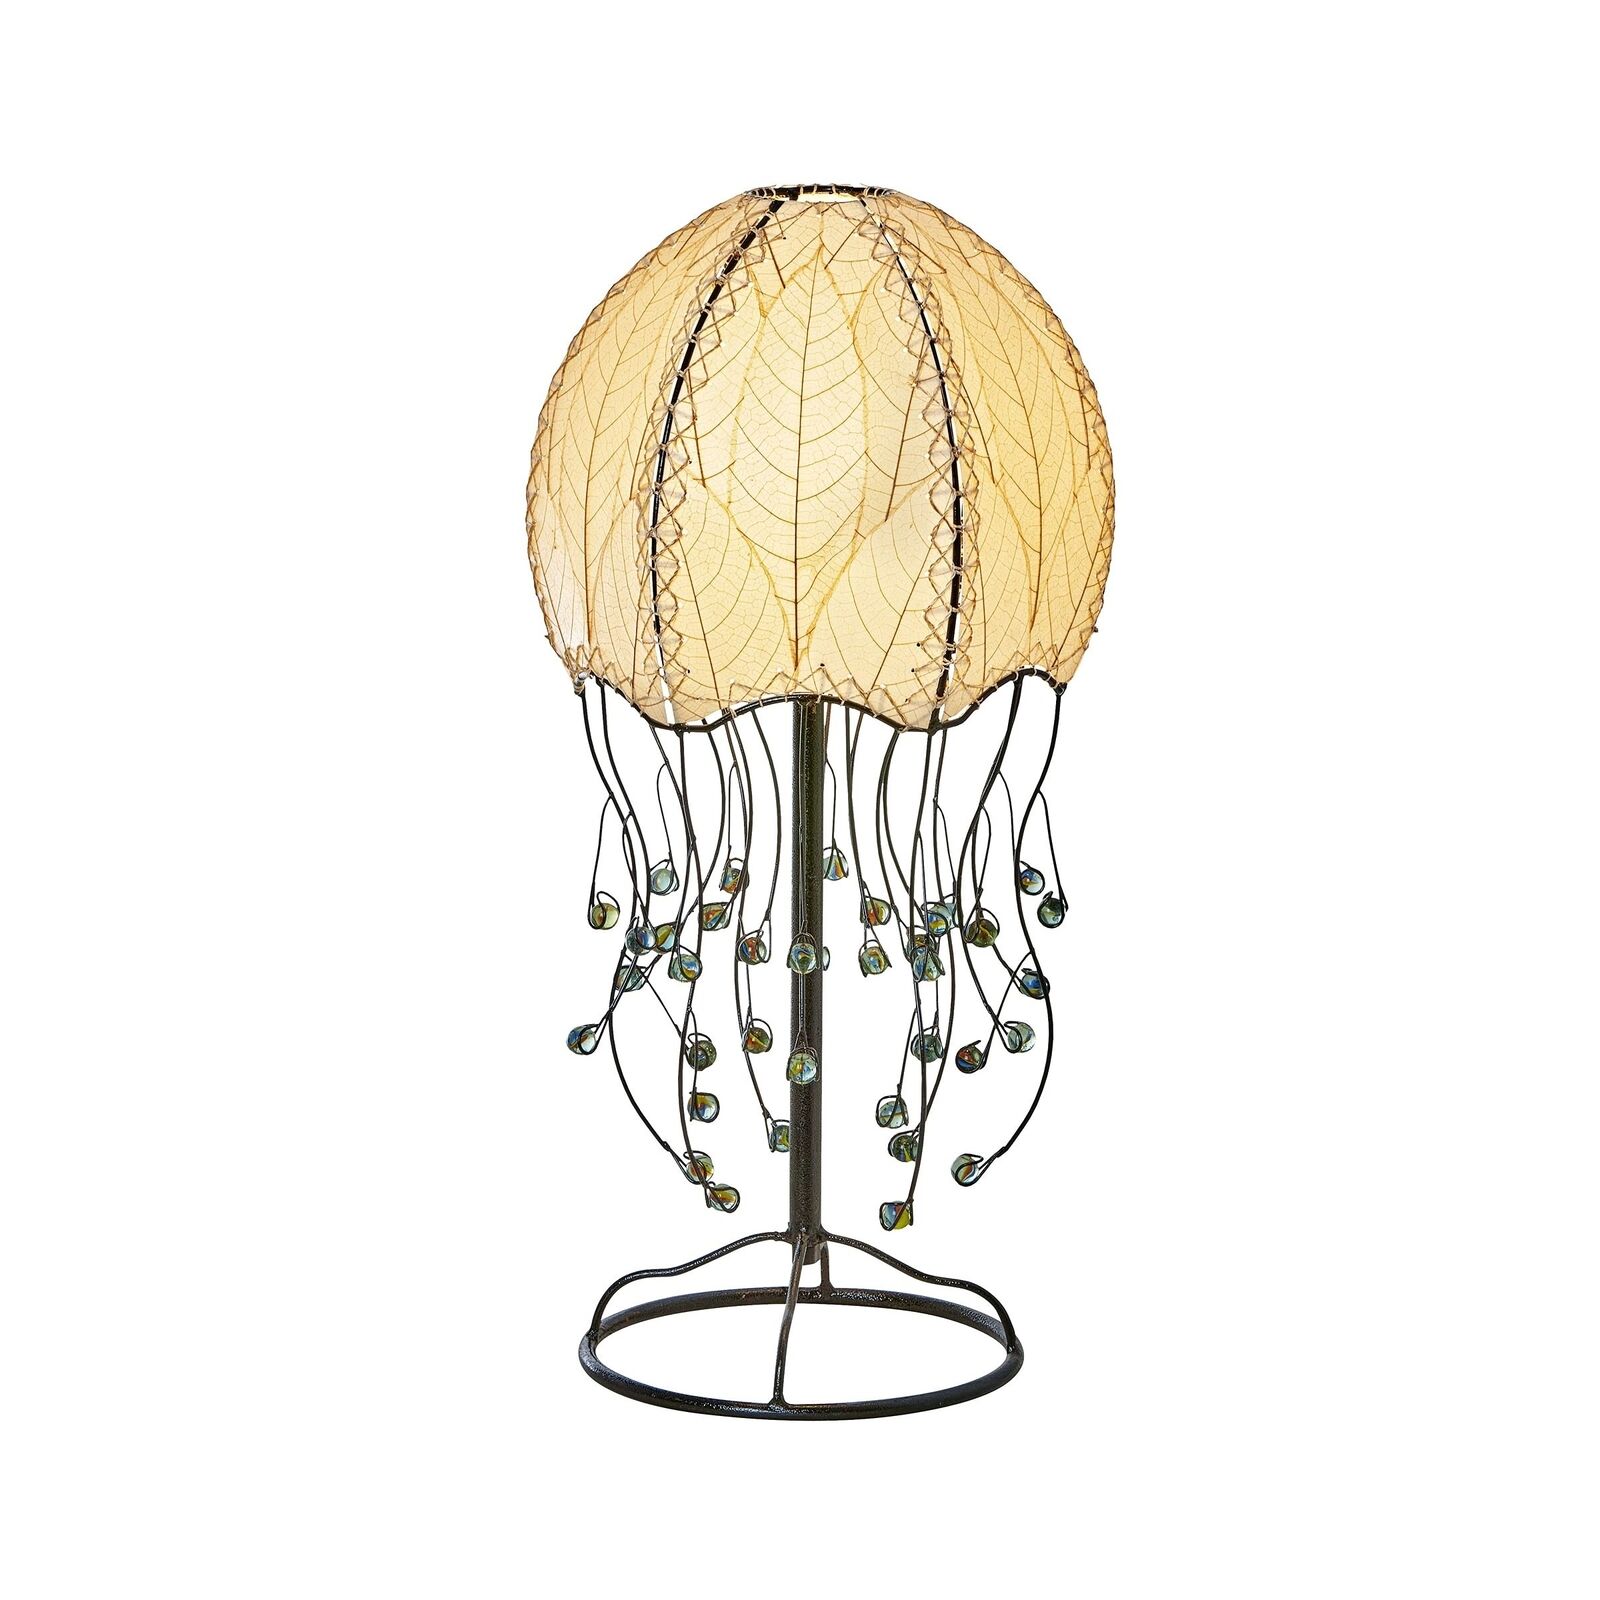 Eangee Home Design Jellyfish Table Lamp Natural Shade Made of Real Cocoa Leav...